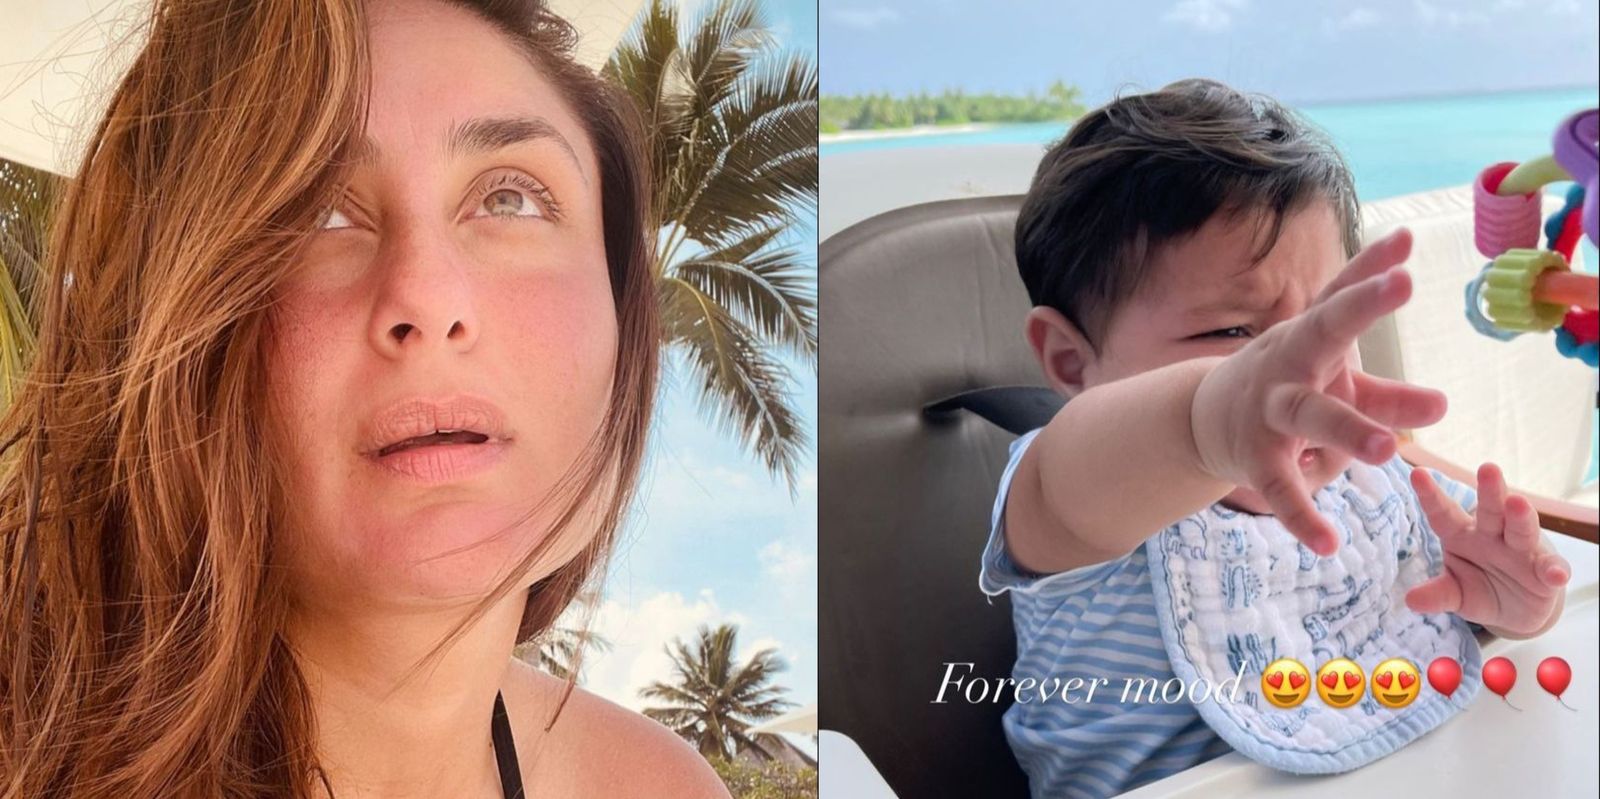 Kareena Kapoor Khan shares a glimpse of her and son Jeh’s moods during their beach vacation